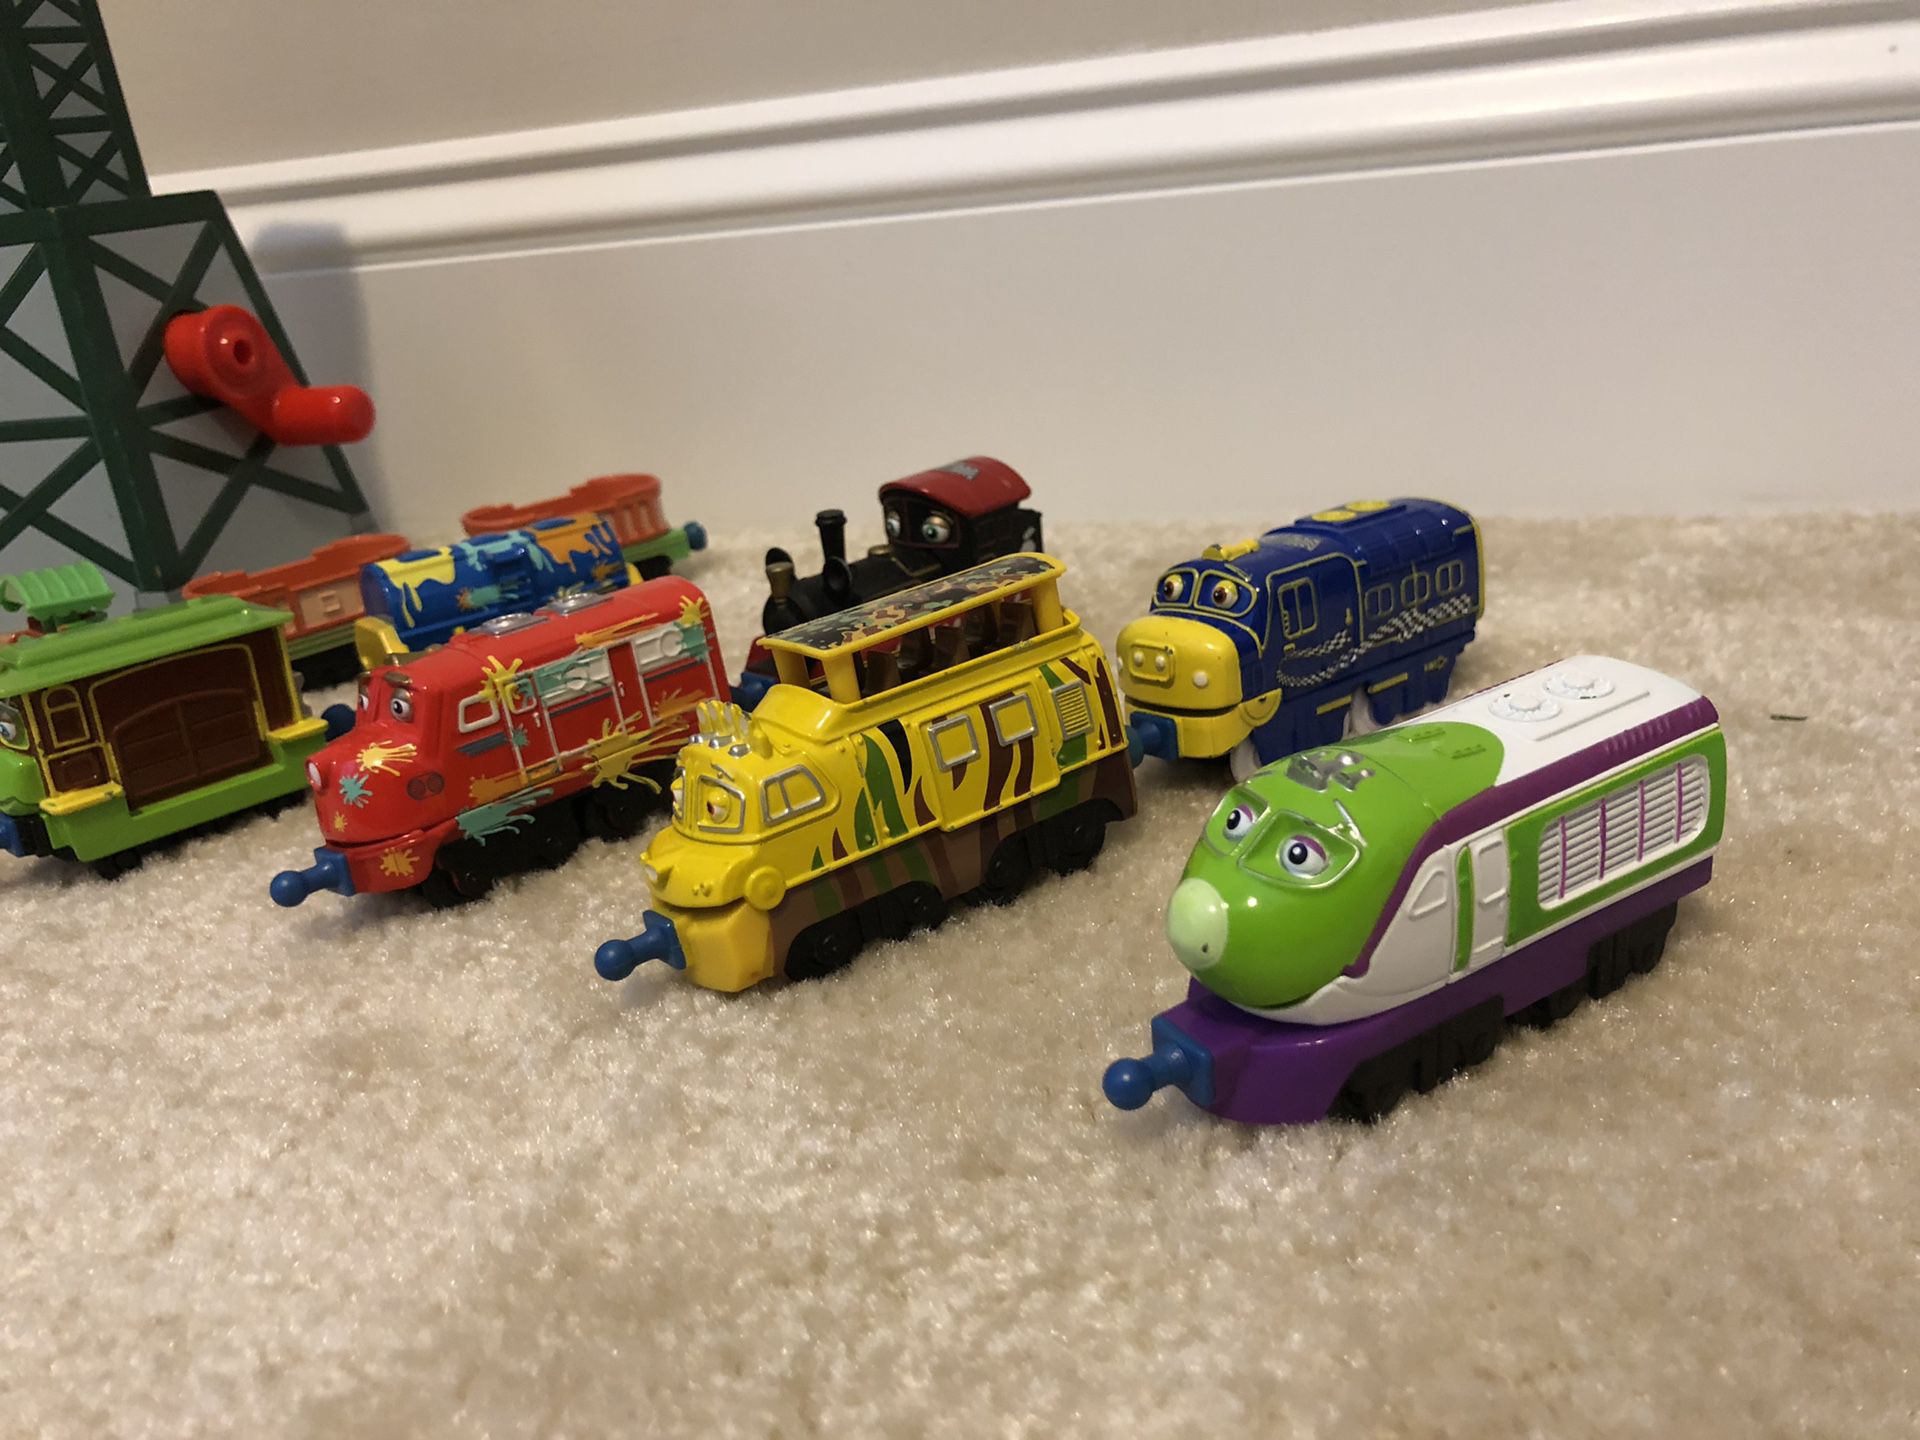 Trains Chuggington and Cranky from Thomas the Train